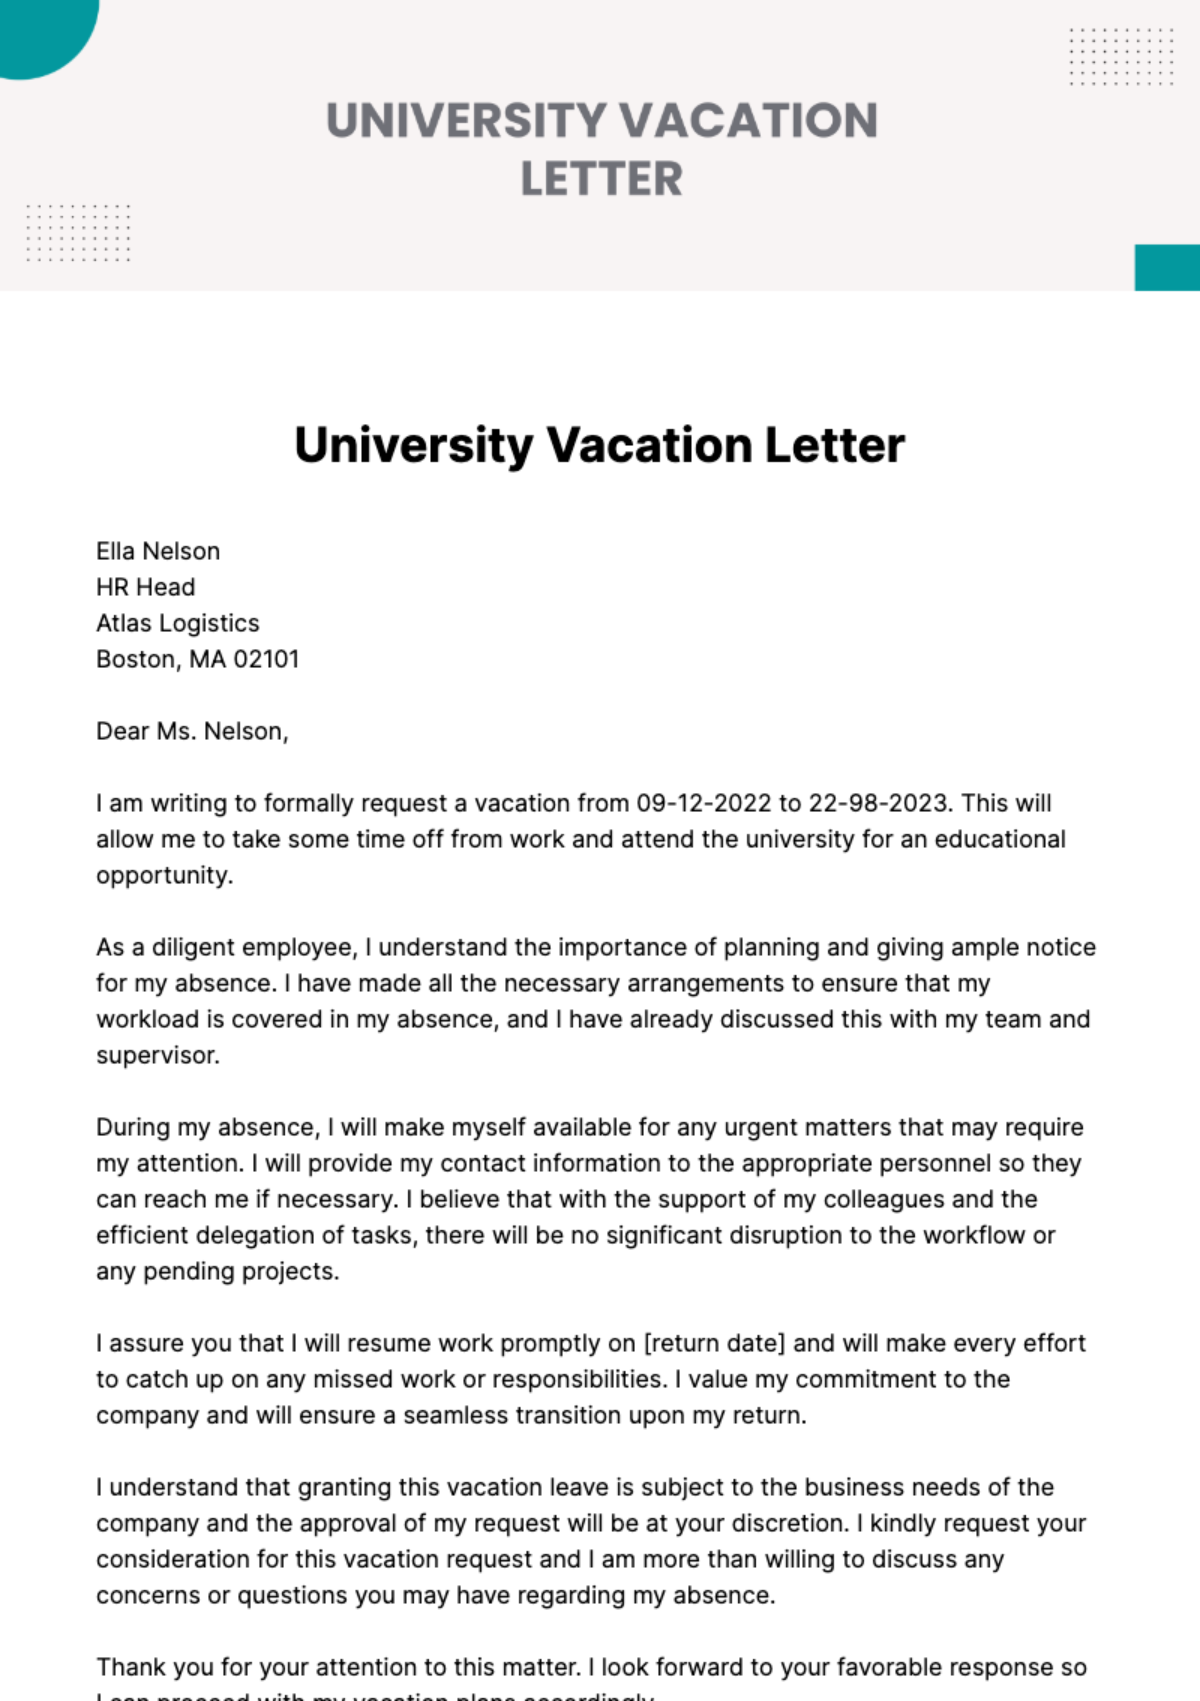 Free University Vacation Letter Template